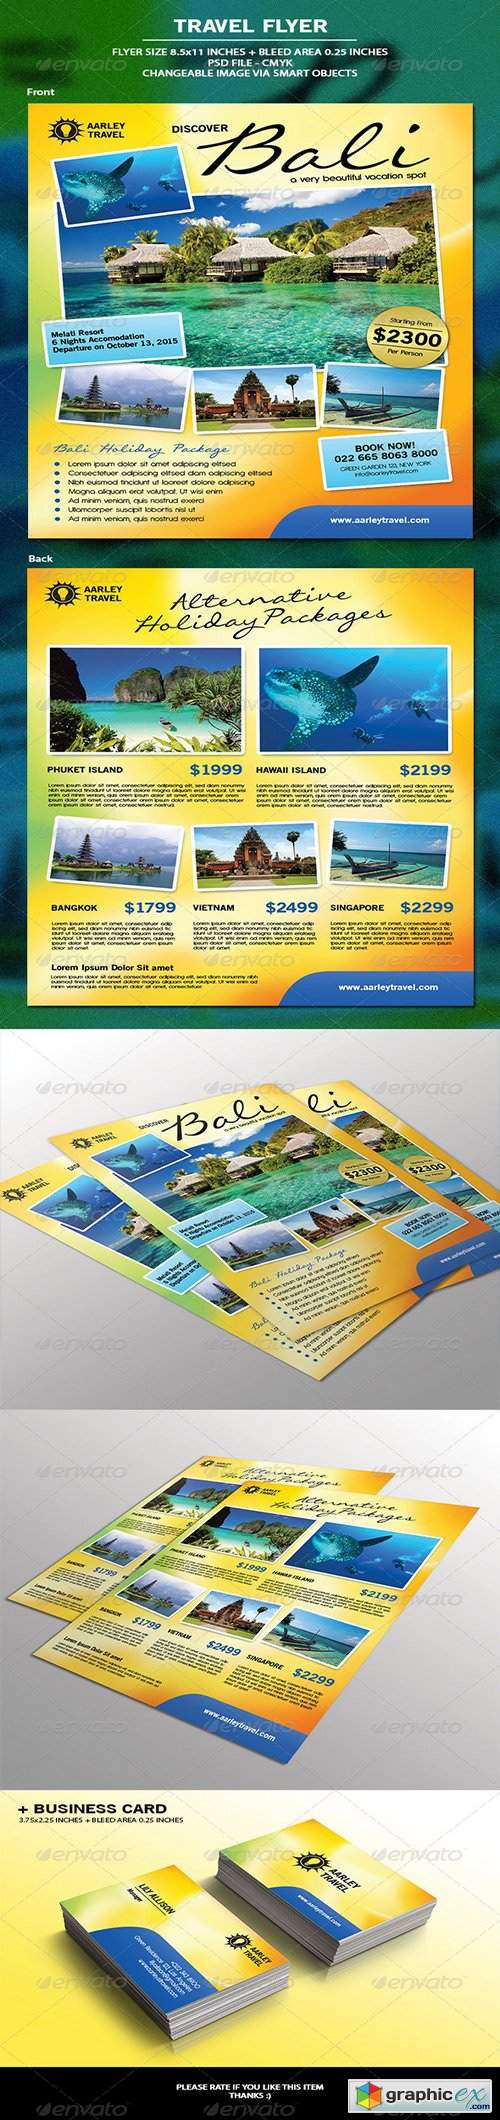 Travel Flyer + Business Card 6867642